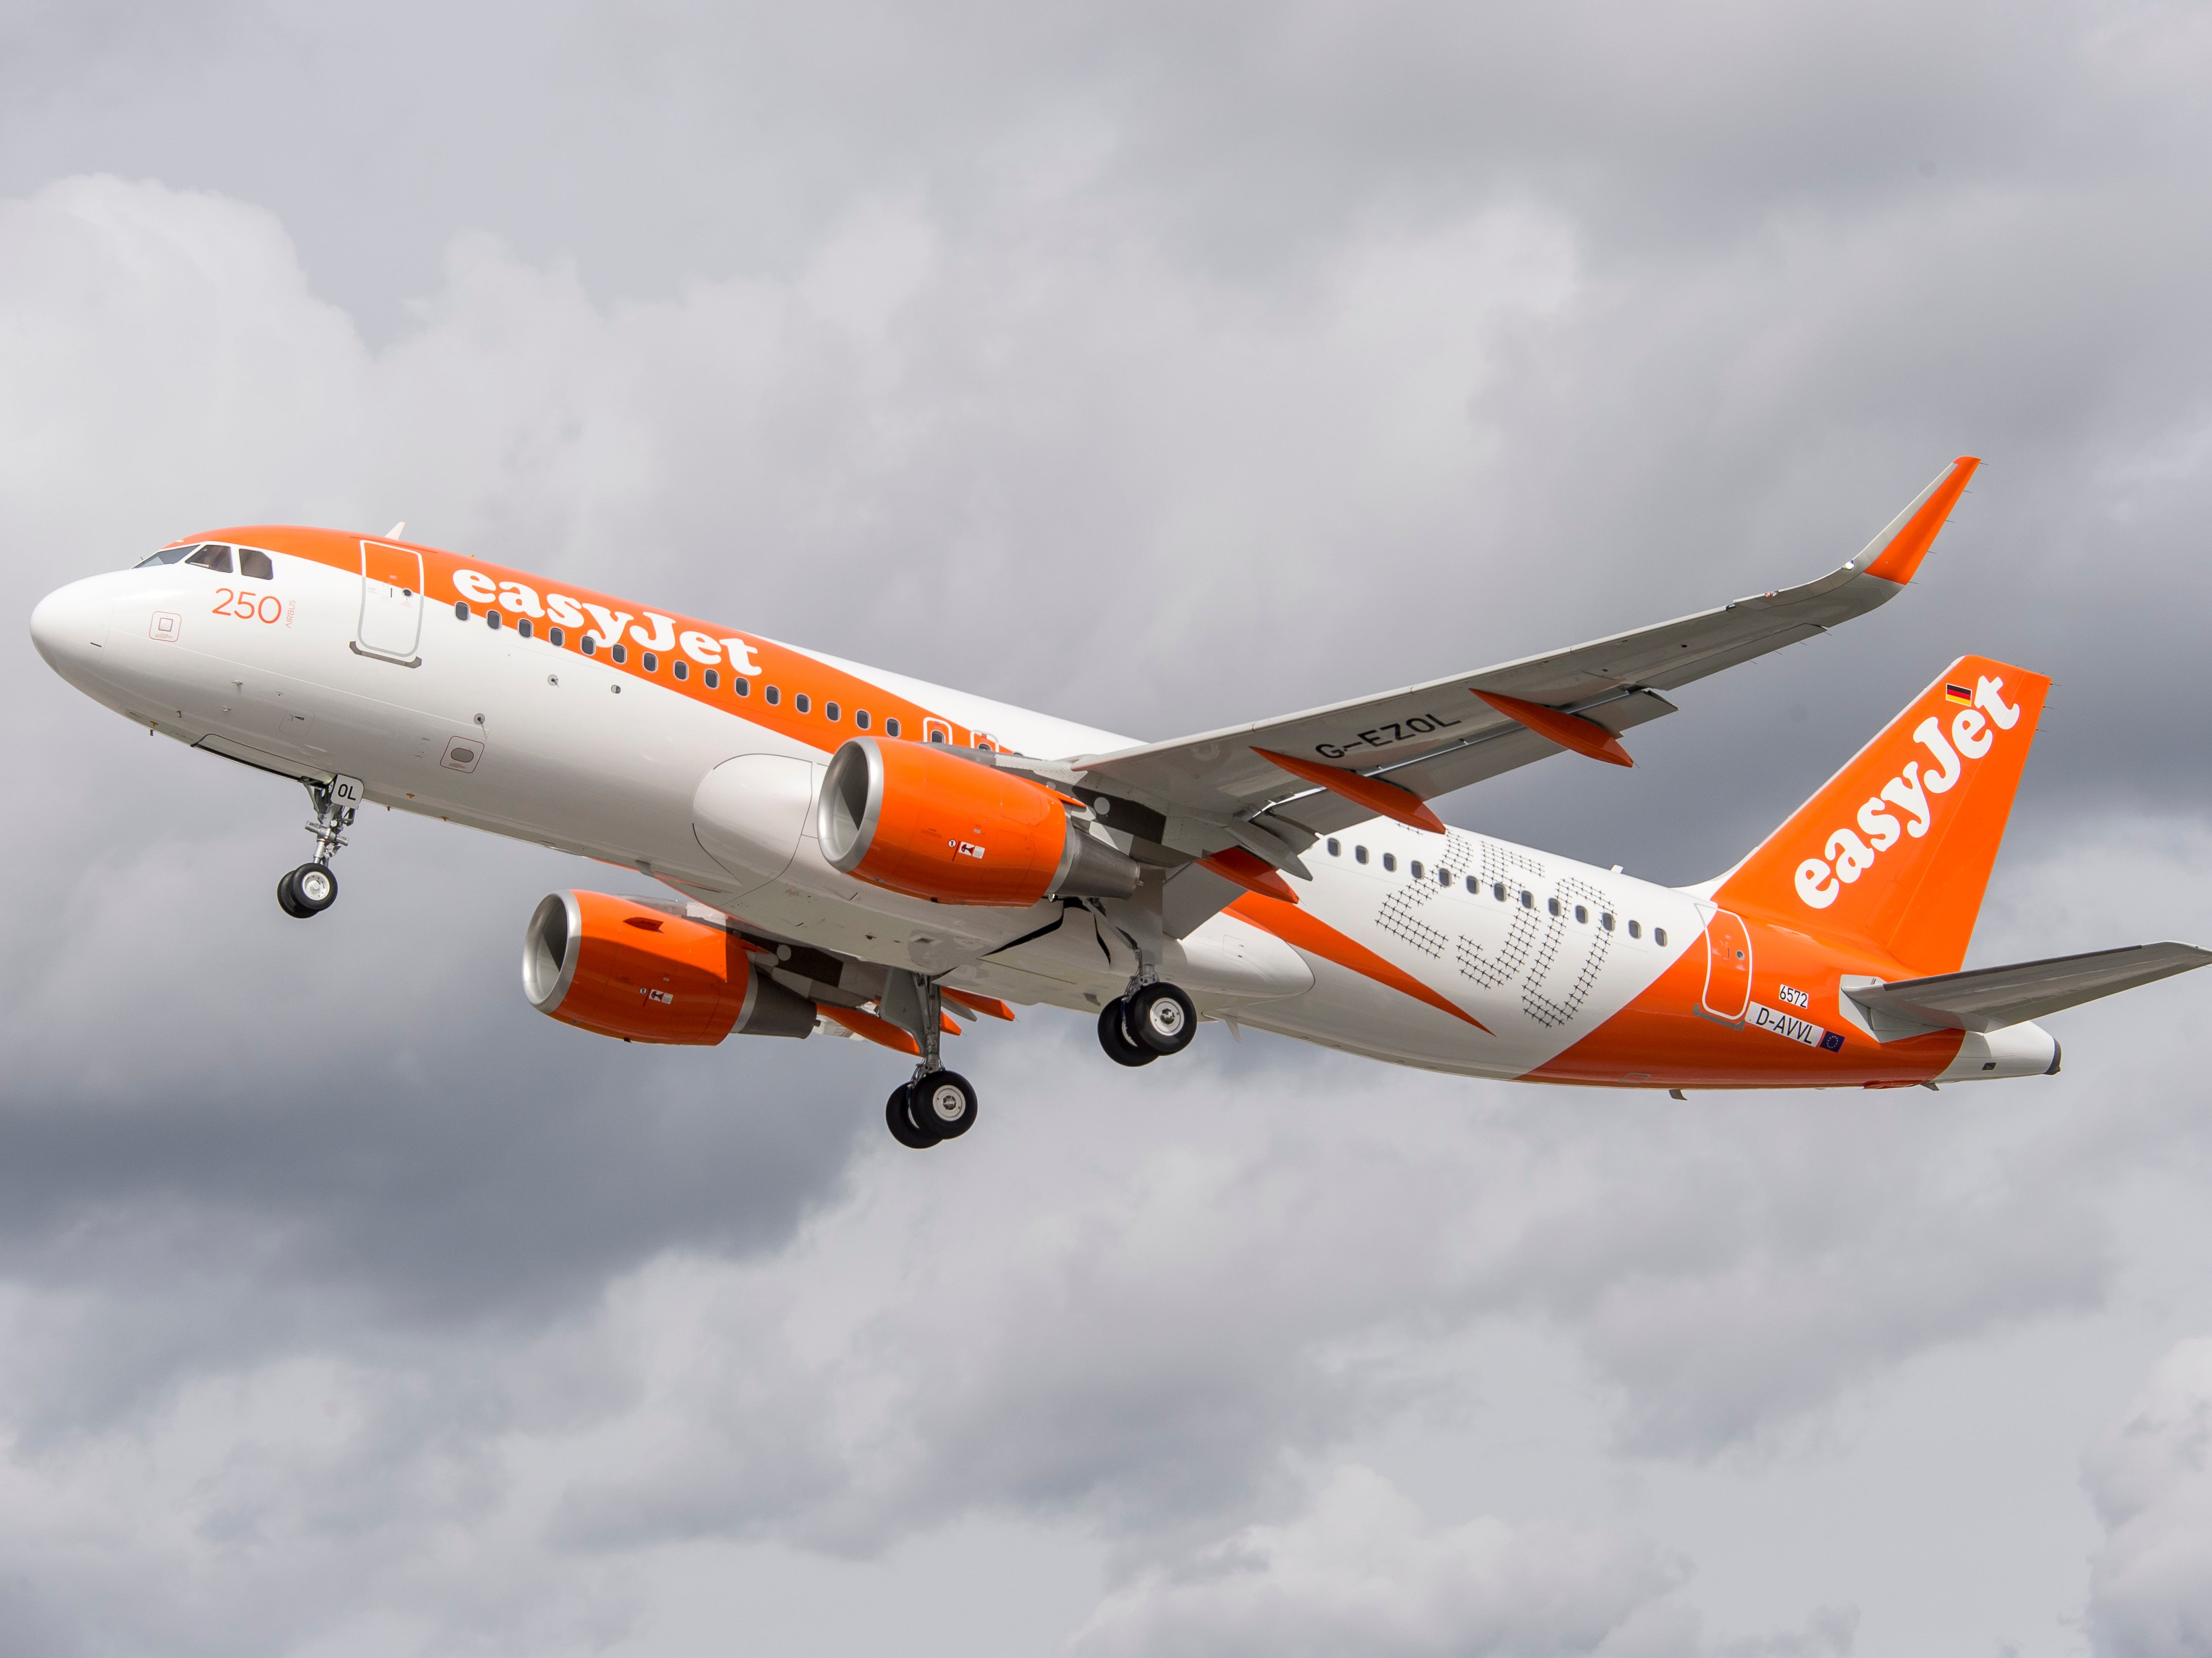 Flight rules: ‘ flying should be a safe and enjoyable experience for everyone, regardless of their gender,’ says easyJet